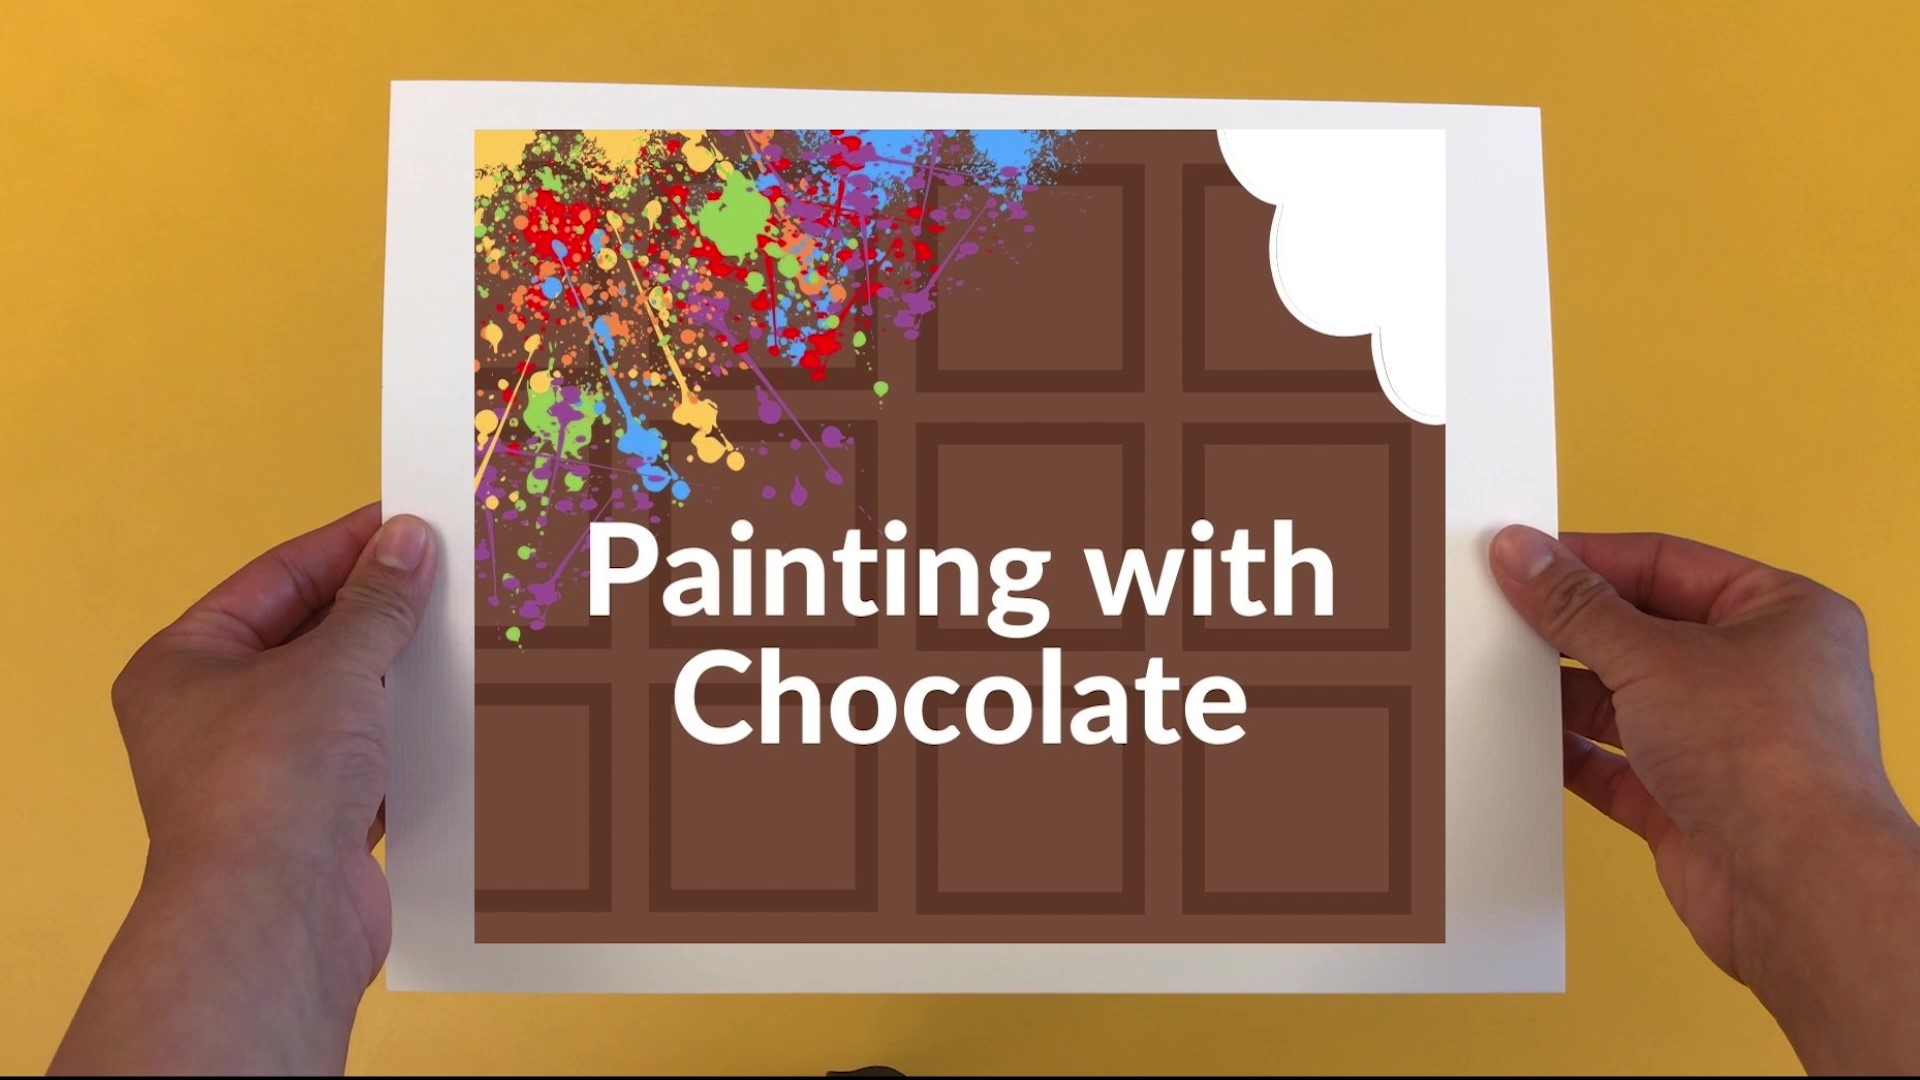 Painting with Chocolate!